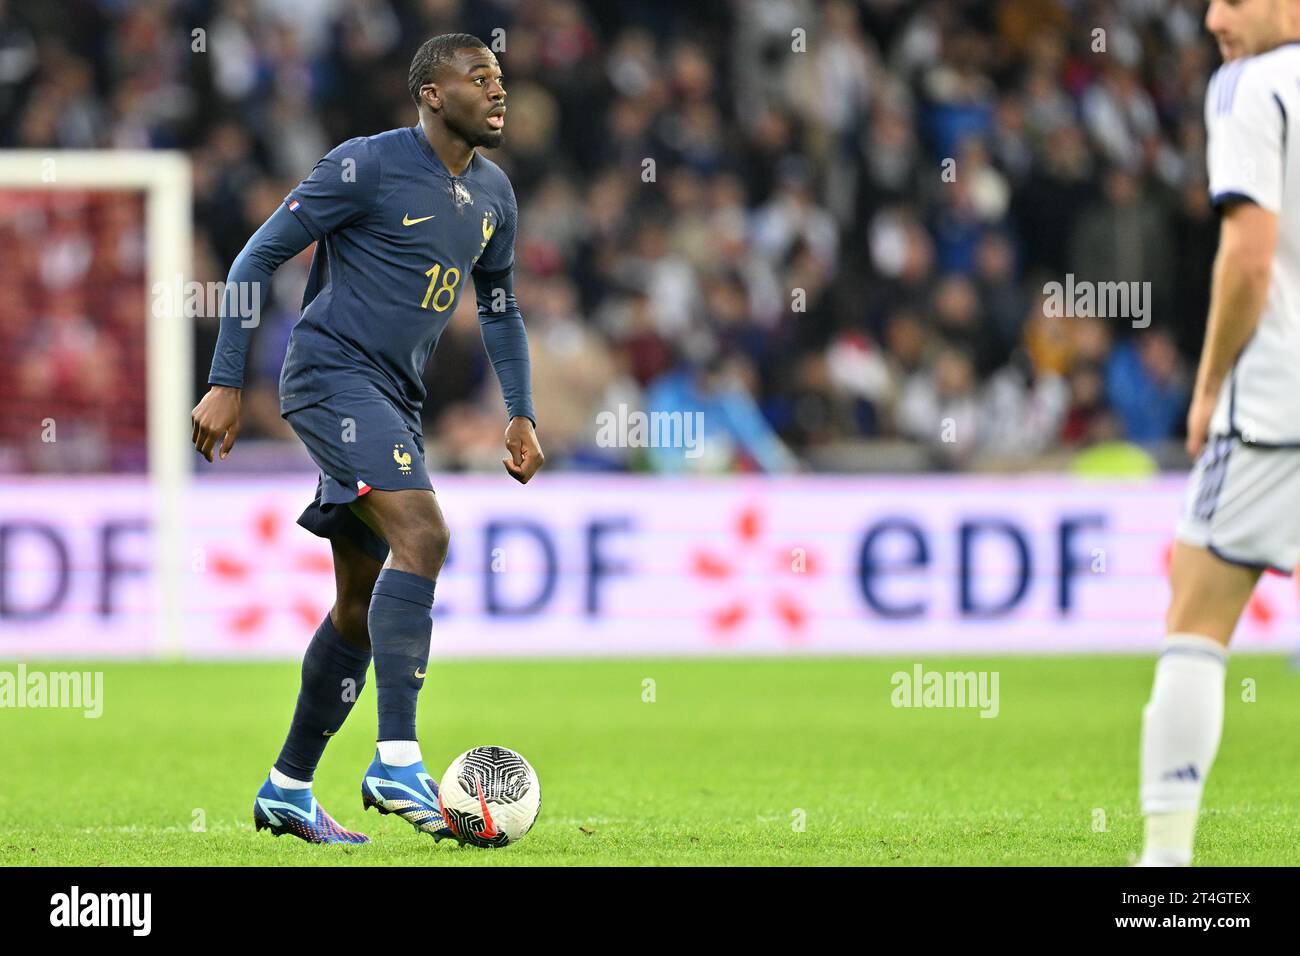 Youssouf Fofana (18) of France pictured during a soccer game between the national teams of France and Scotland in friendly game, on October 17 , 2023 in Lille, France. (Photo by David Catry / Sportpix) Stock Photo